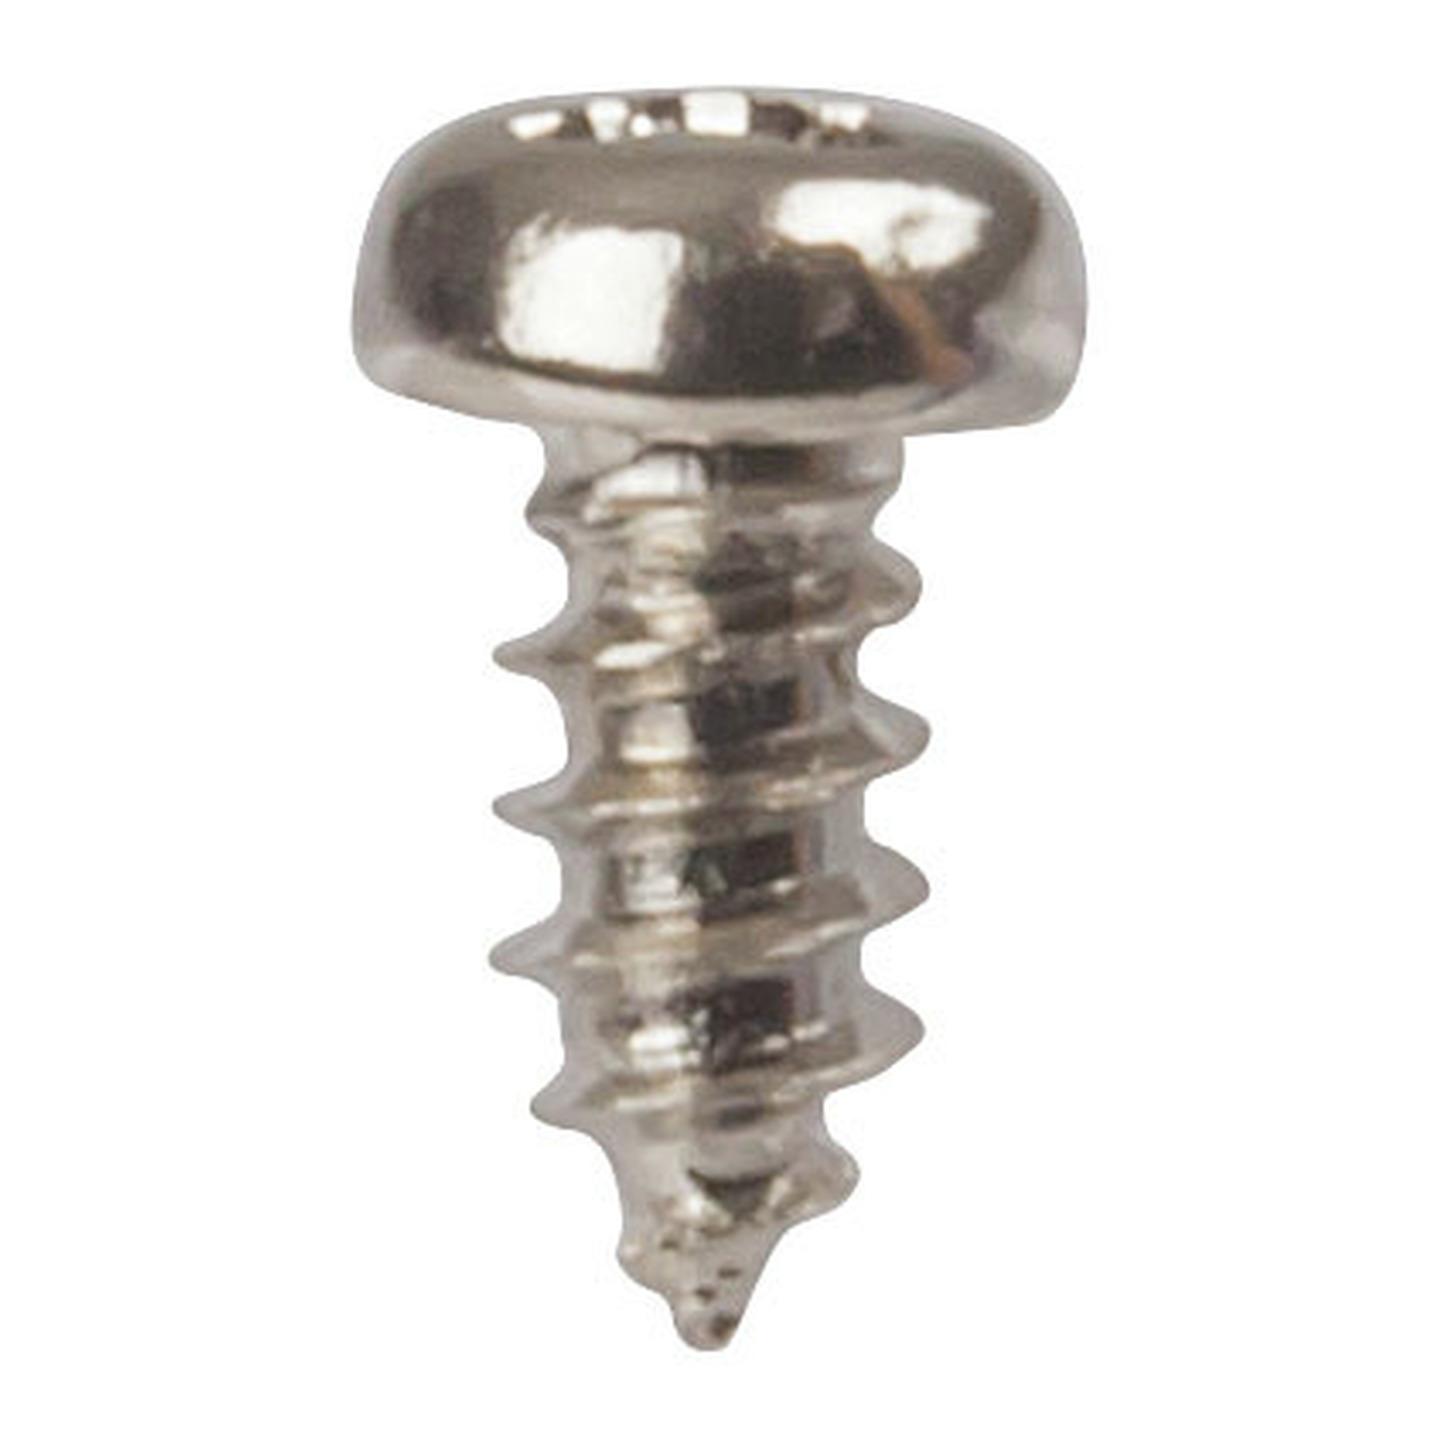 No.4 x 6mm Steel Self Tapping Screws - Pack of 25